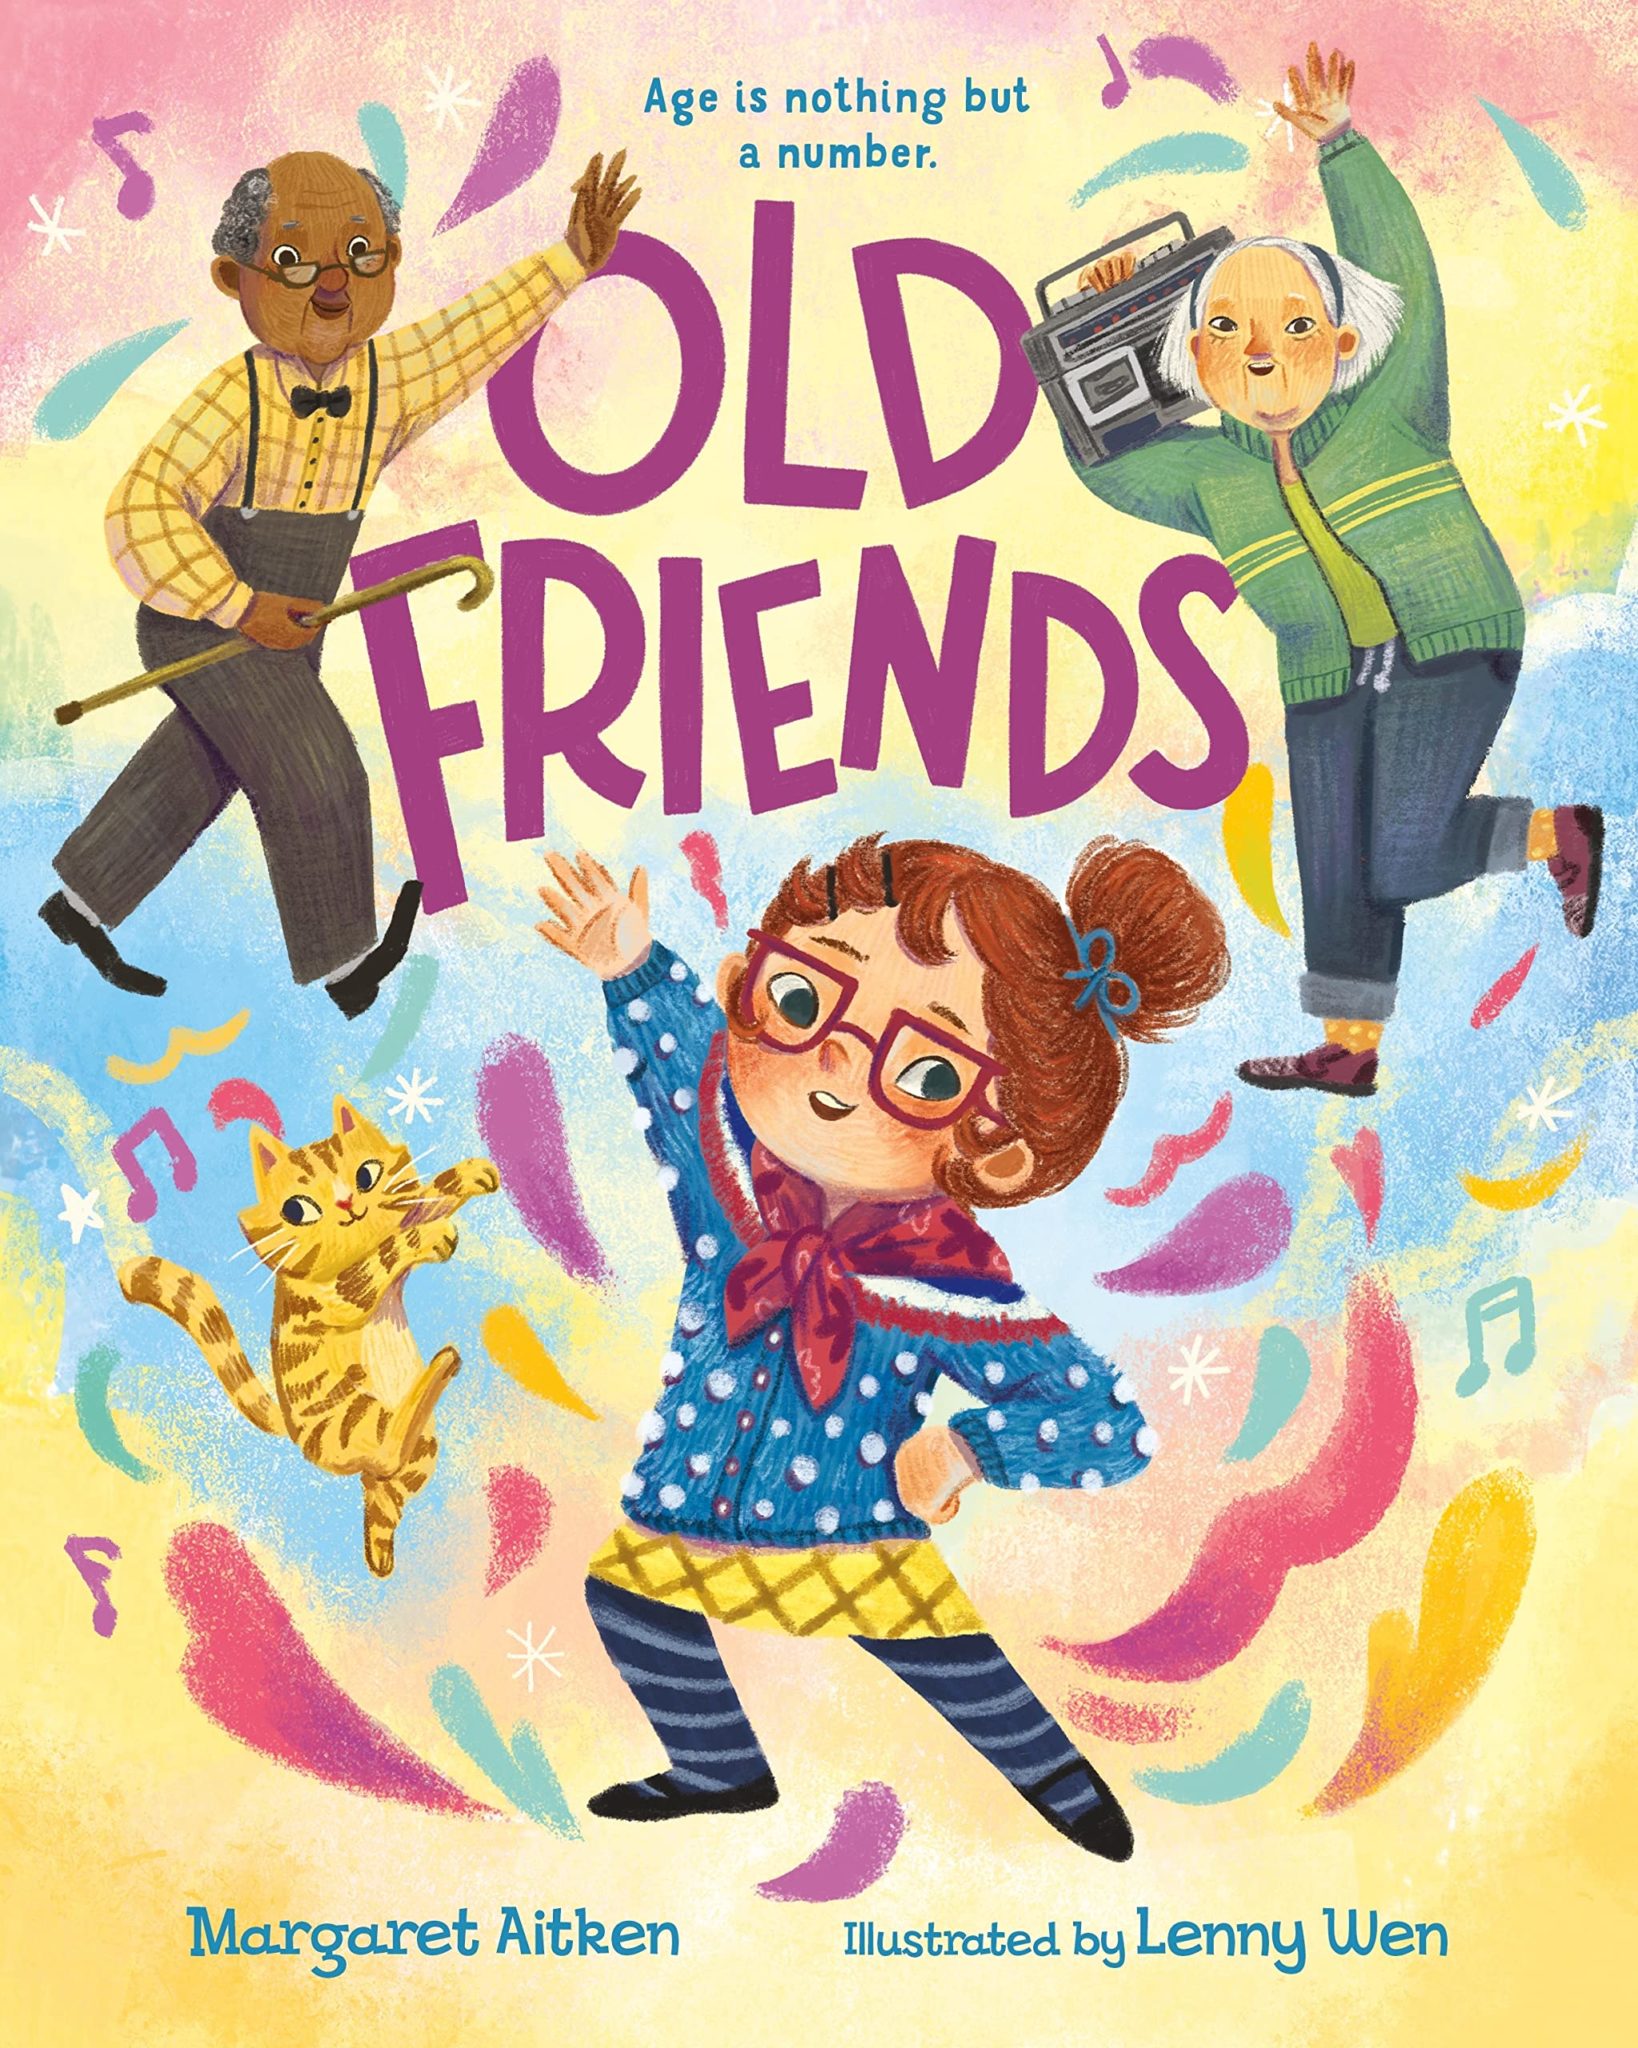 The cover of the picture book "Old Friends" features a young girl dressed as an old woman dancing with a cat, an elderly man, and an elderly woman holding a boombox. Swirls of color and music notes surround them.